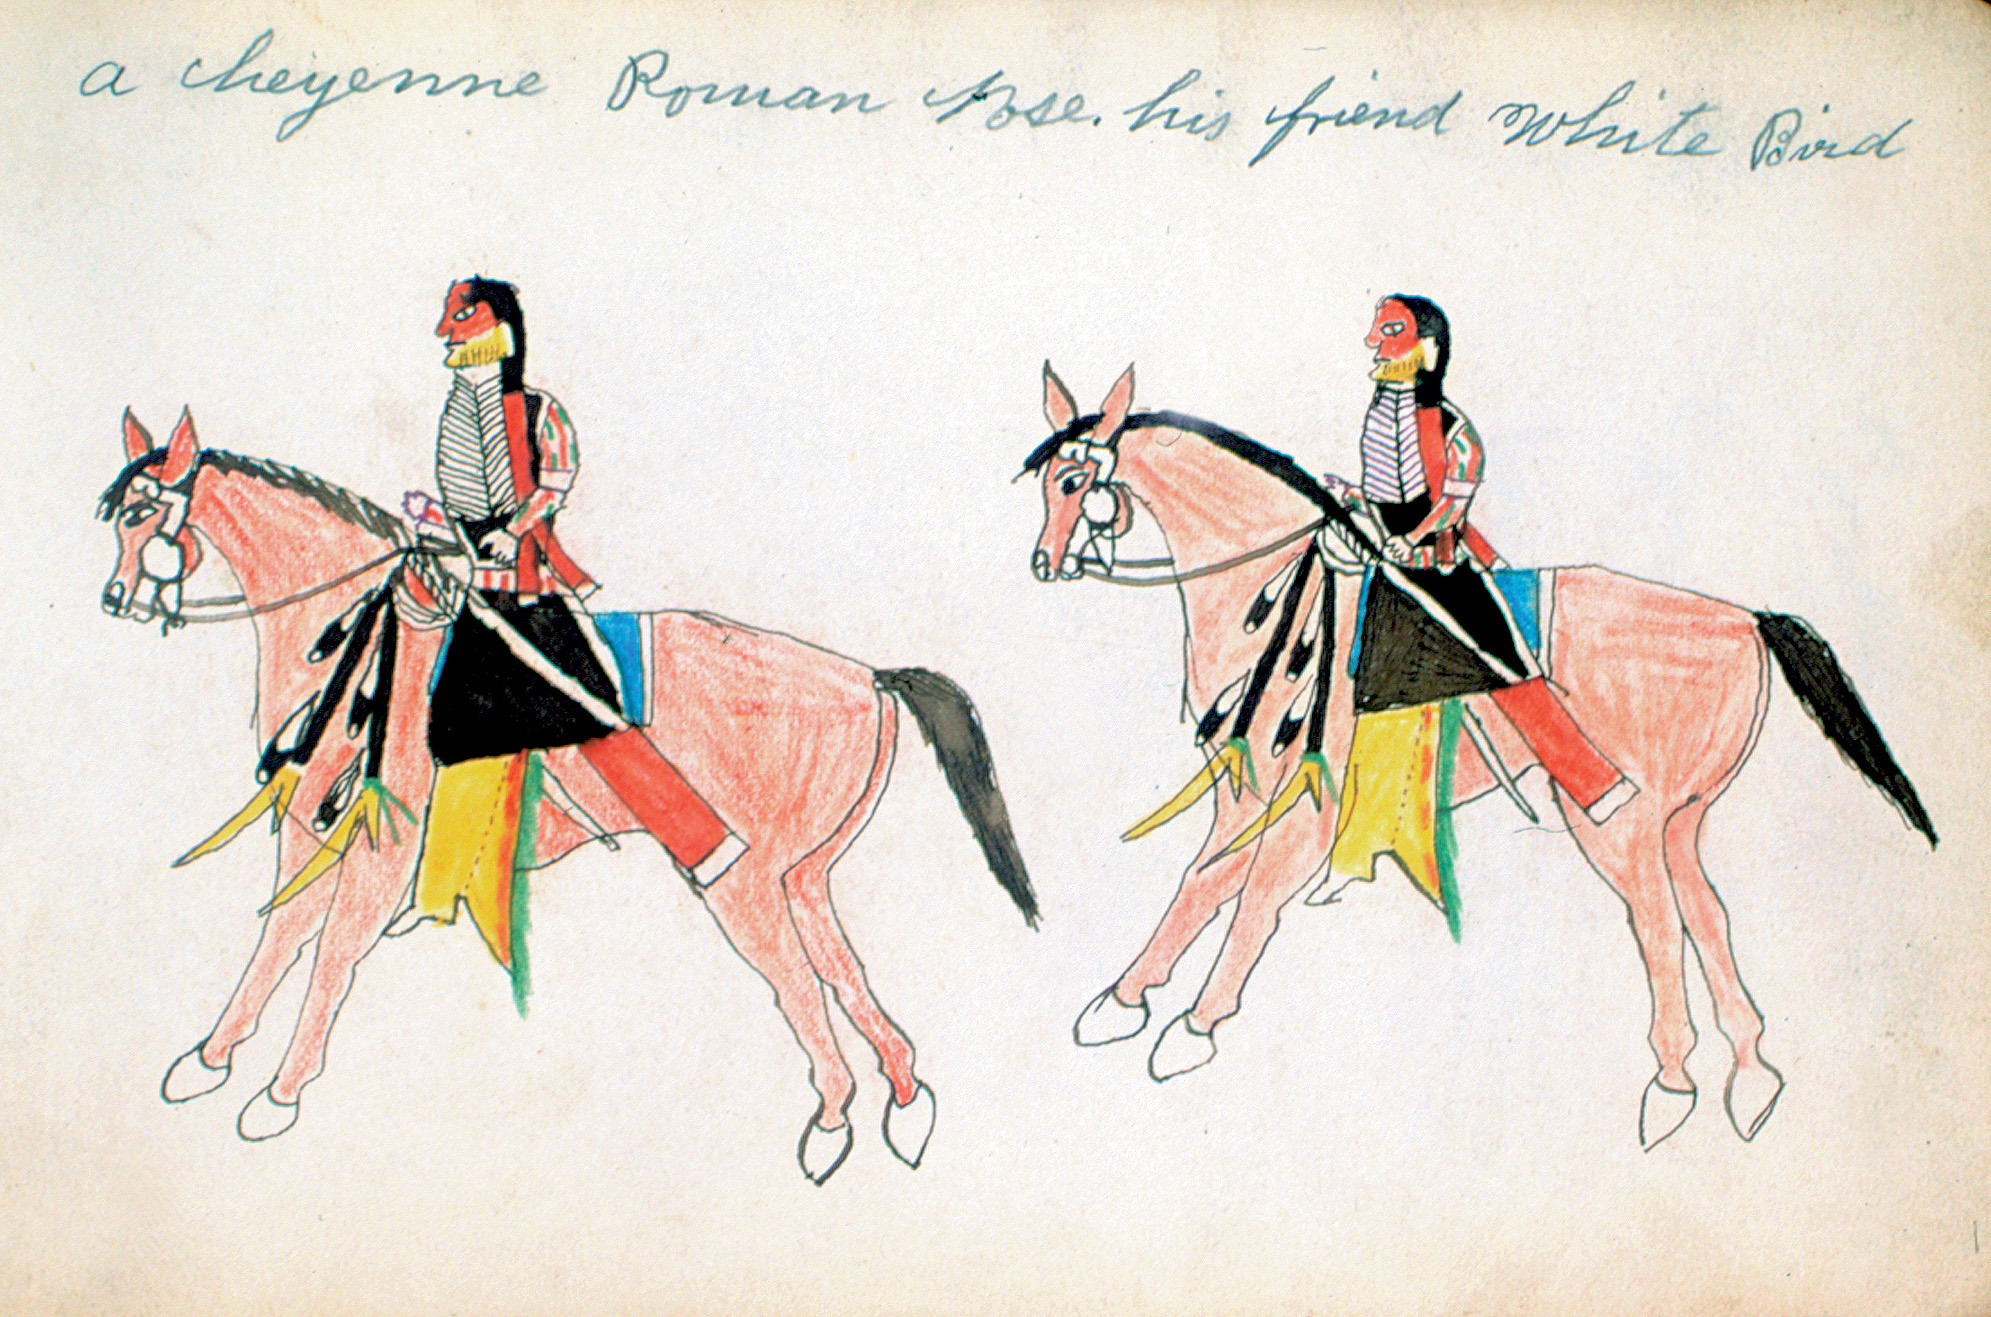 A drawing of Roman Nose, who may have fought in the Fort Wallace clash, with his friend White Bird.